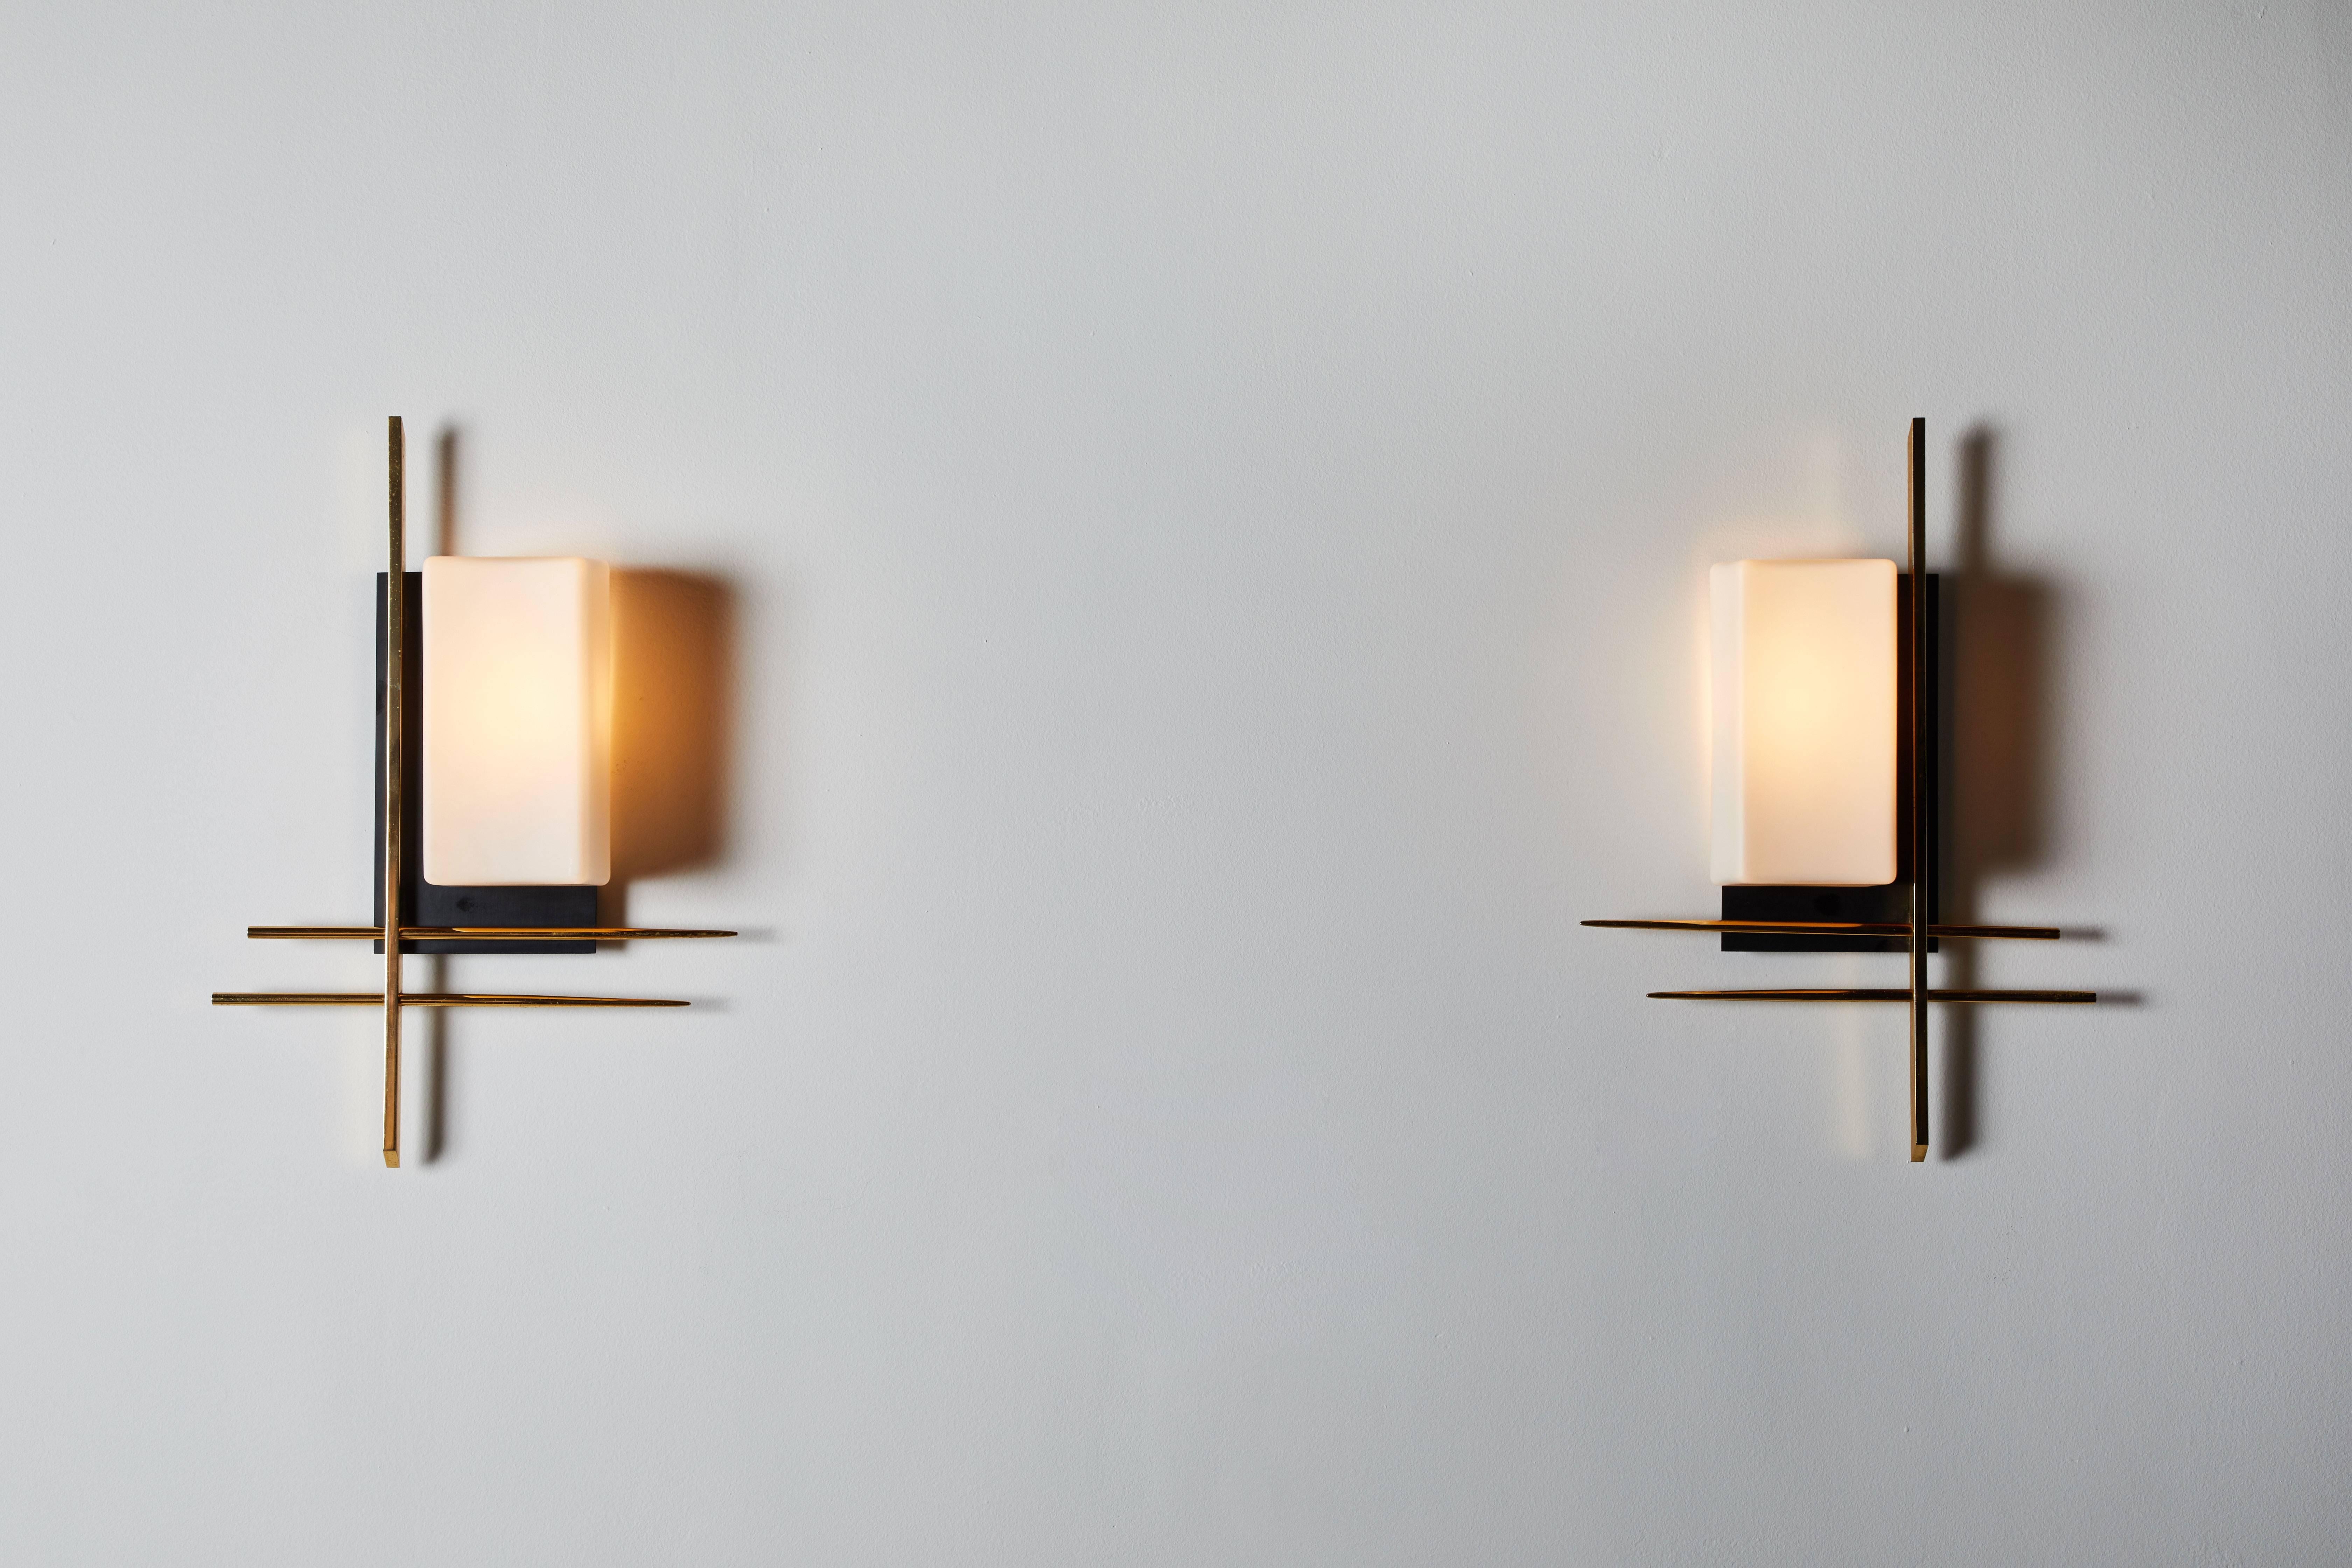 Pair of sconces by Arlus manufactured in France, circa 1950s. Brass, enameled metal and brushed satin glass. Wired for US junction boxes. Each sconce takes one 75w maximum Bayonet bulb.